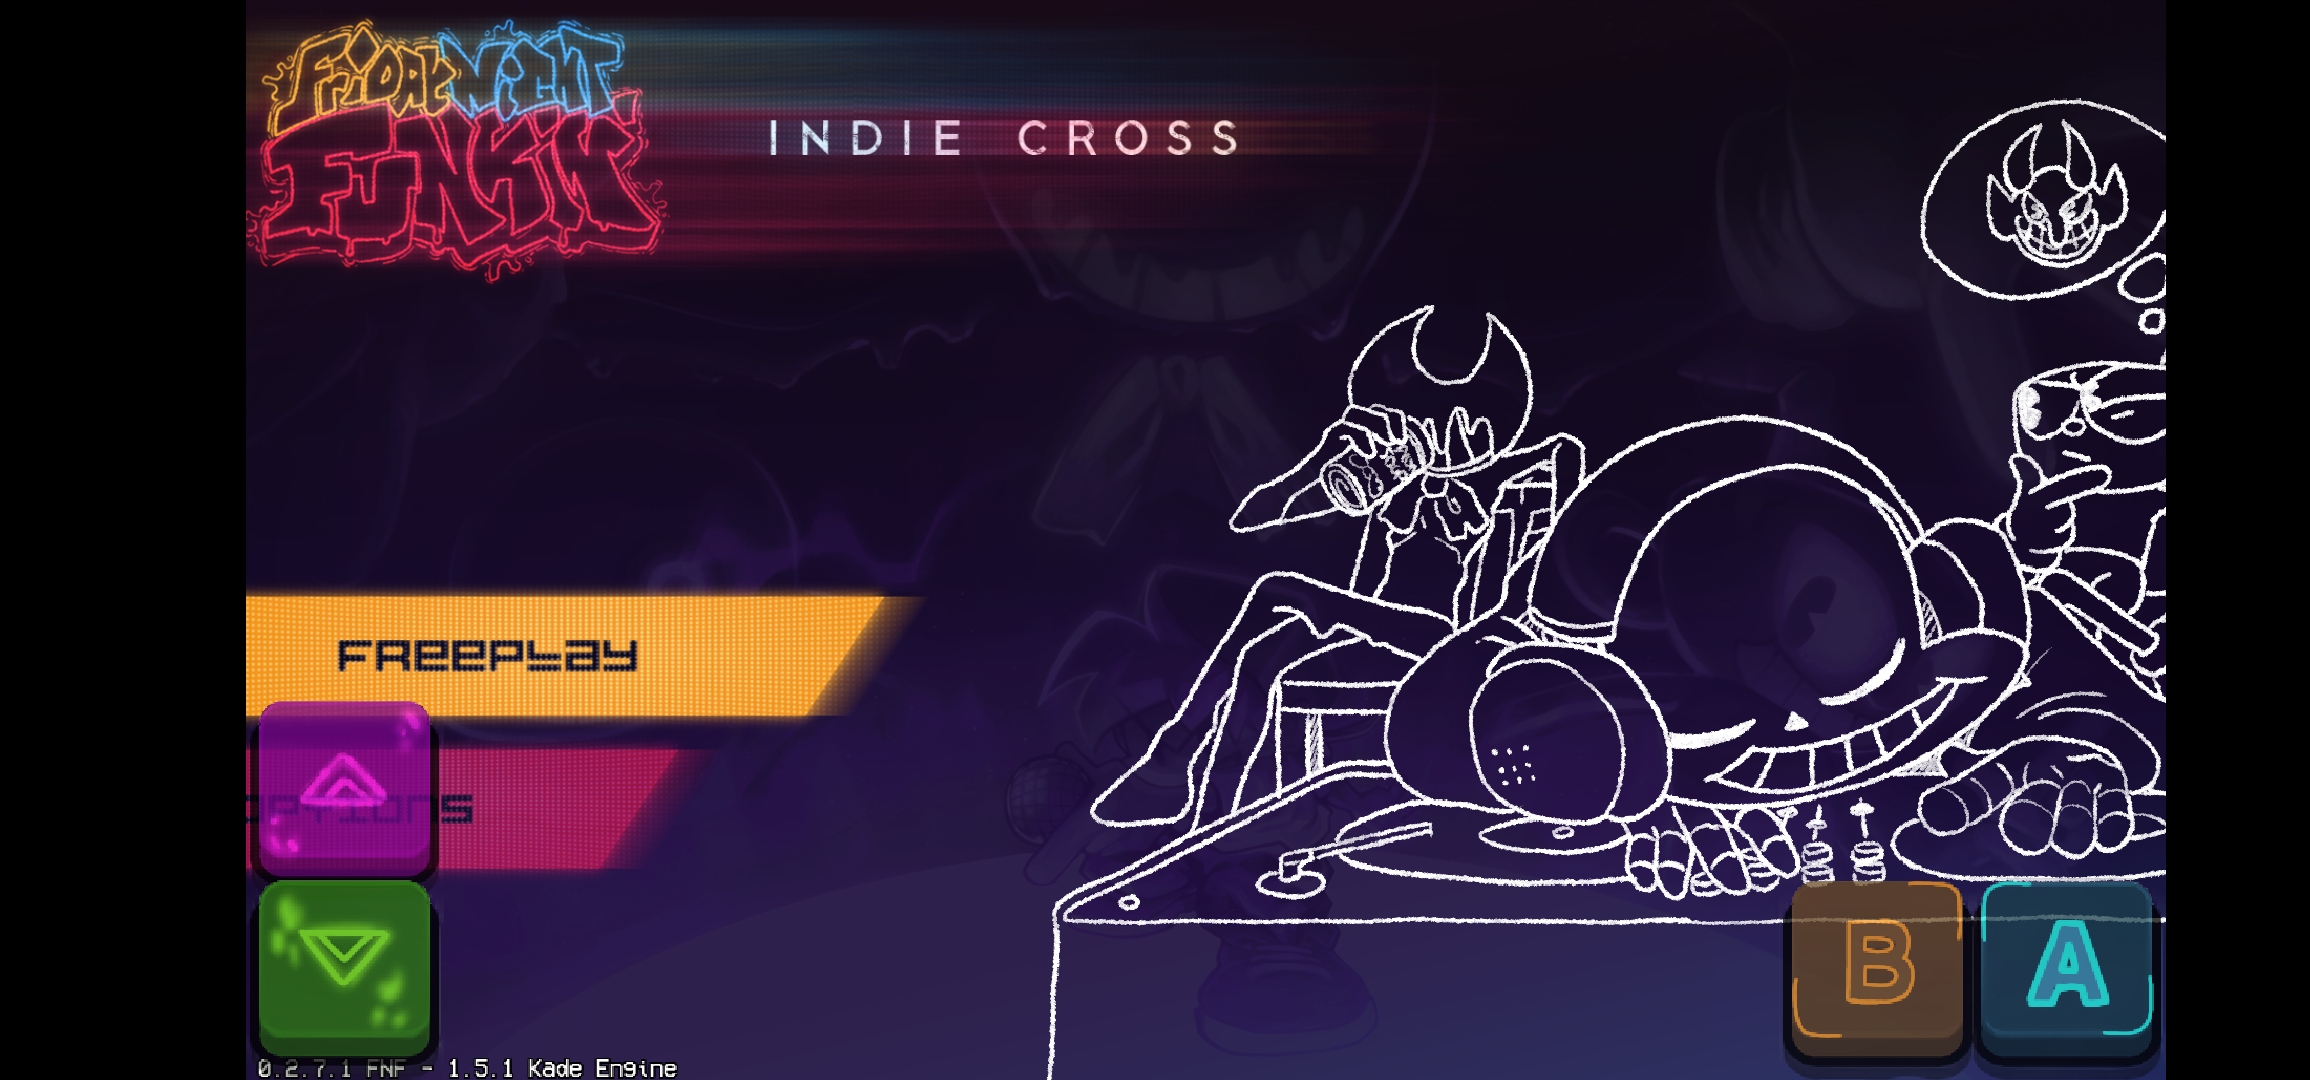 Indie Cross PE port Android [Friday Night Funkin'] [Mods]